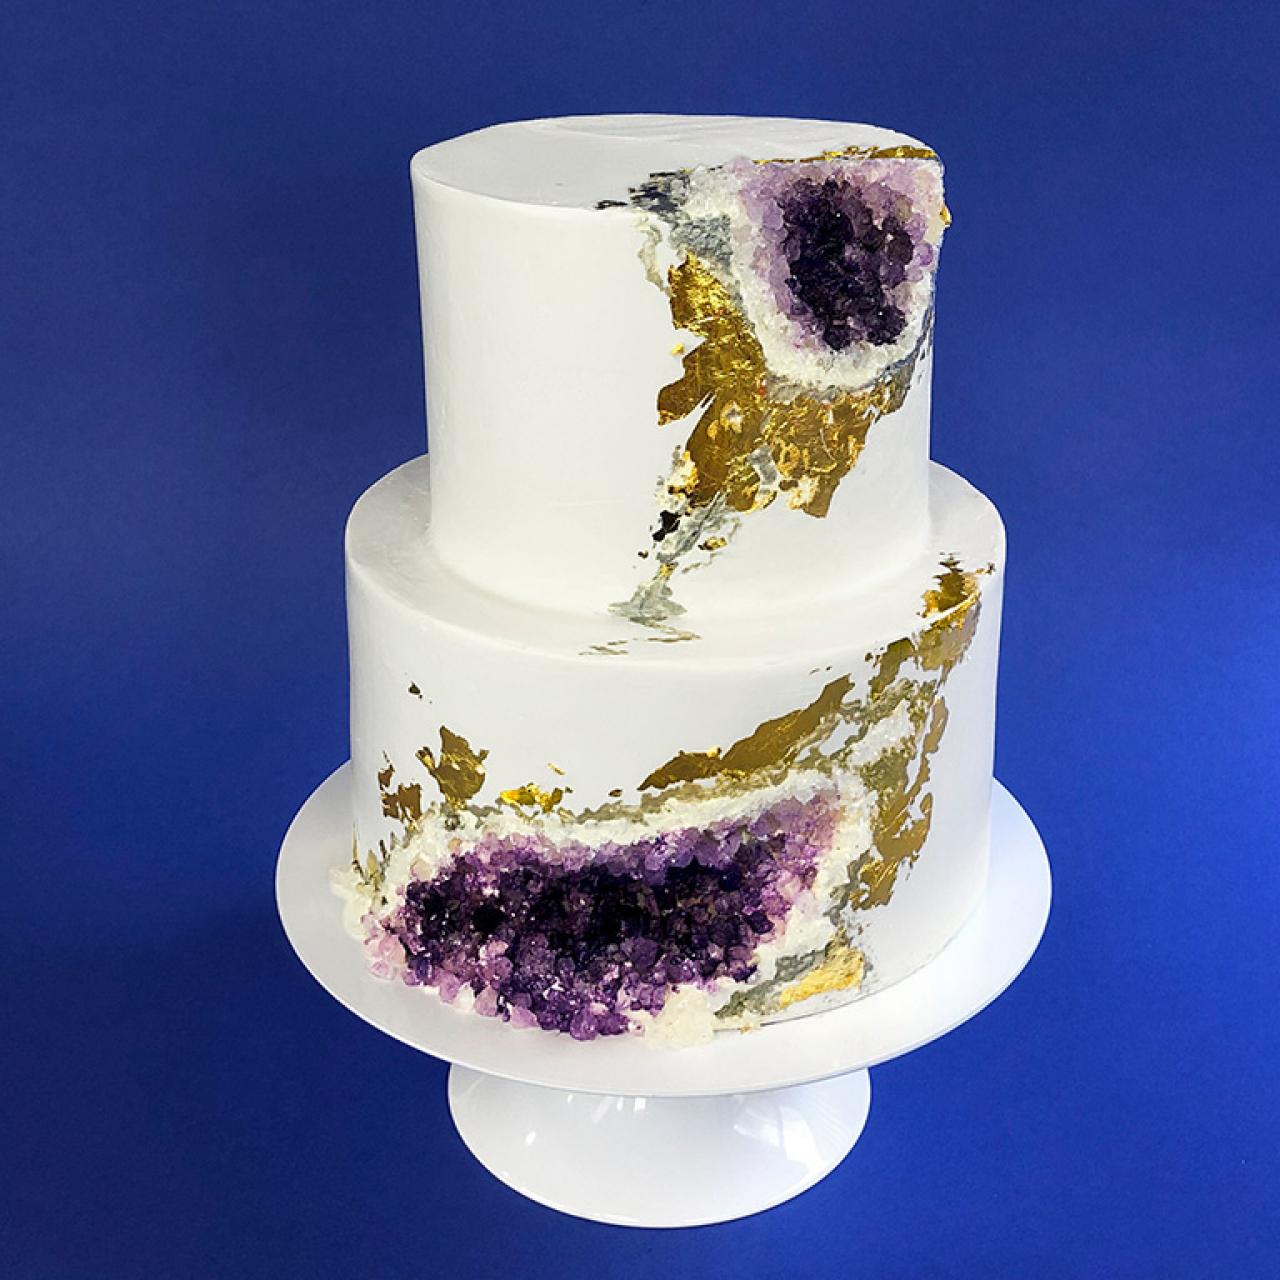 38+ Beautiful Cake Designs To Swoon : Blue Geode Cake